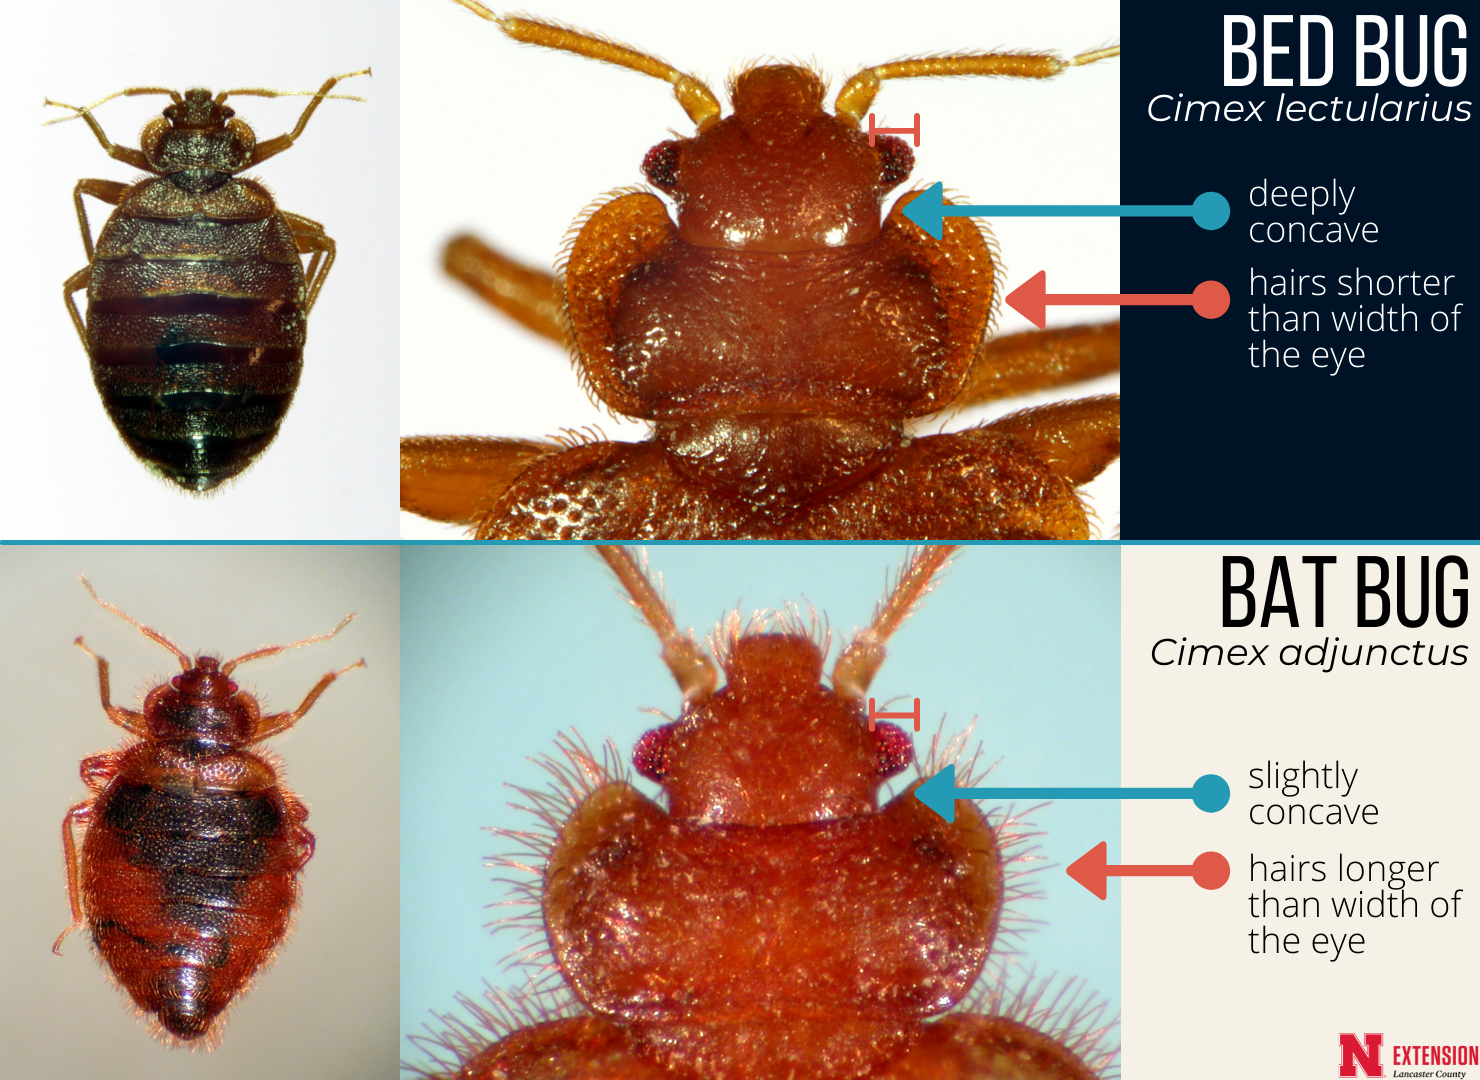 A comparison of bed bugs with short hairs and bat bugs with long hairs